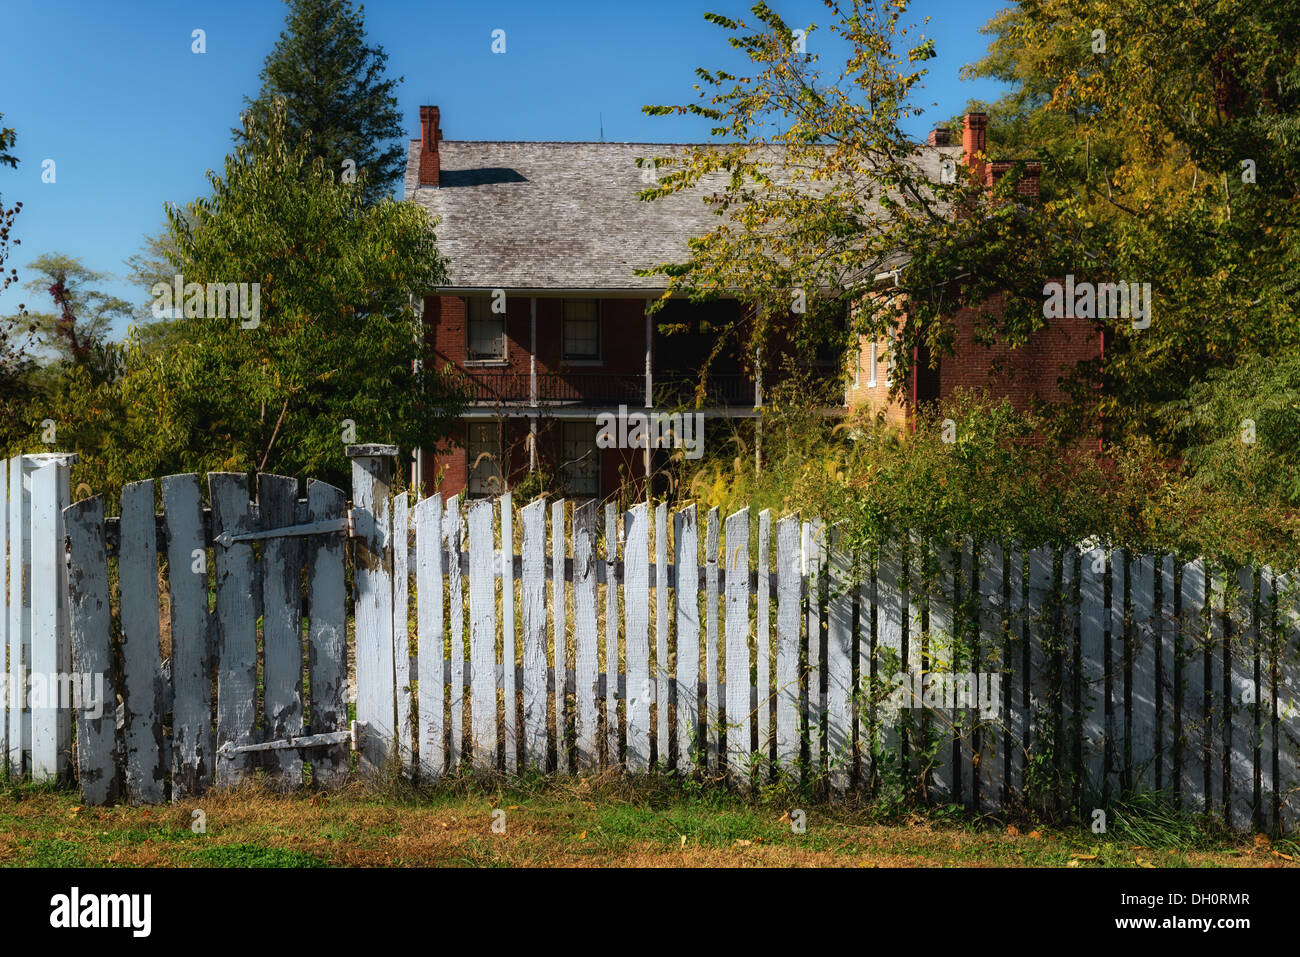 Photograph of a two story brick house surrounded by an unkempt yard and an old white picket fence Stock Photo